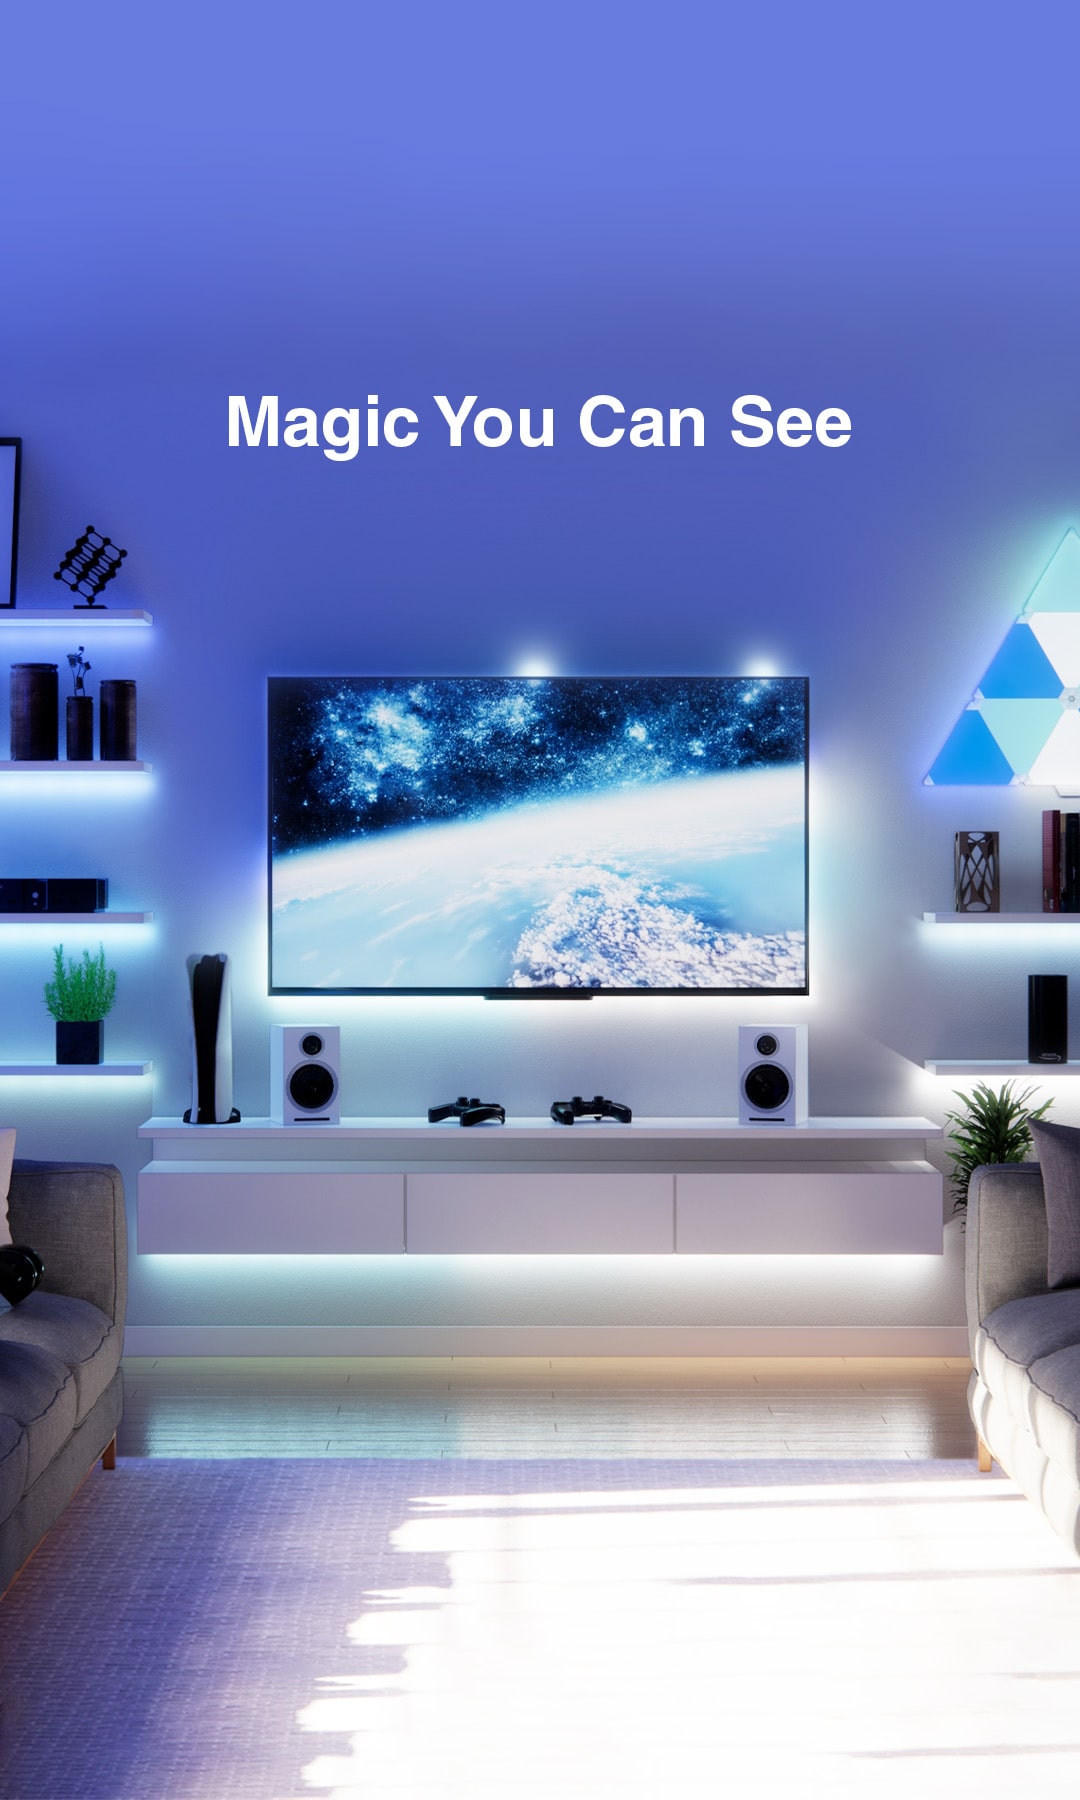 Check Out These LEDs That Sync With Your TV 😲 #leds #fancyleds